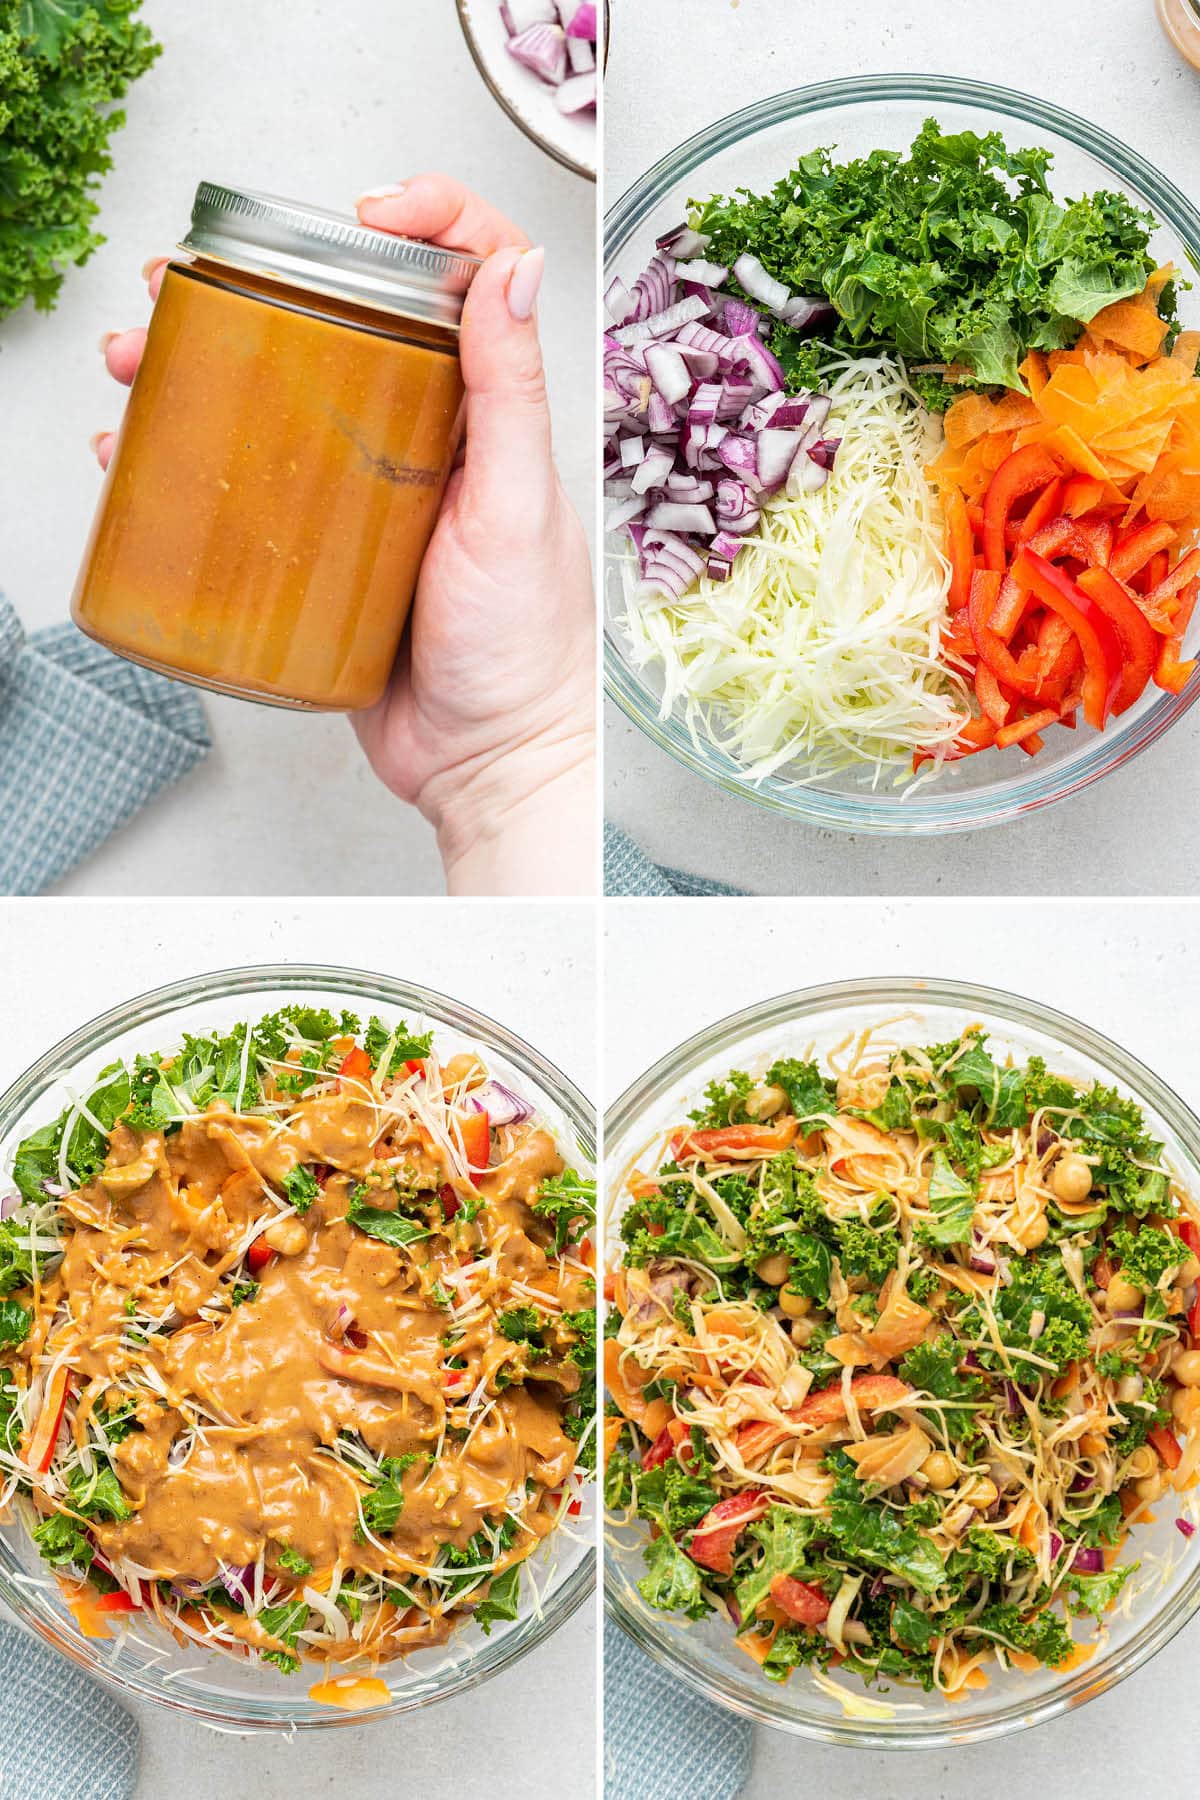 Collage of four photos showing the steps to make Kale & Cabbage Pad Thai Salad: making a peanut dressing, adding veggies to a bowl, pouring on the dressing and then tossing.